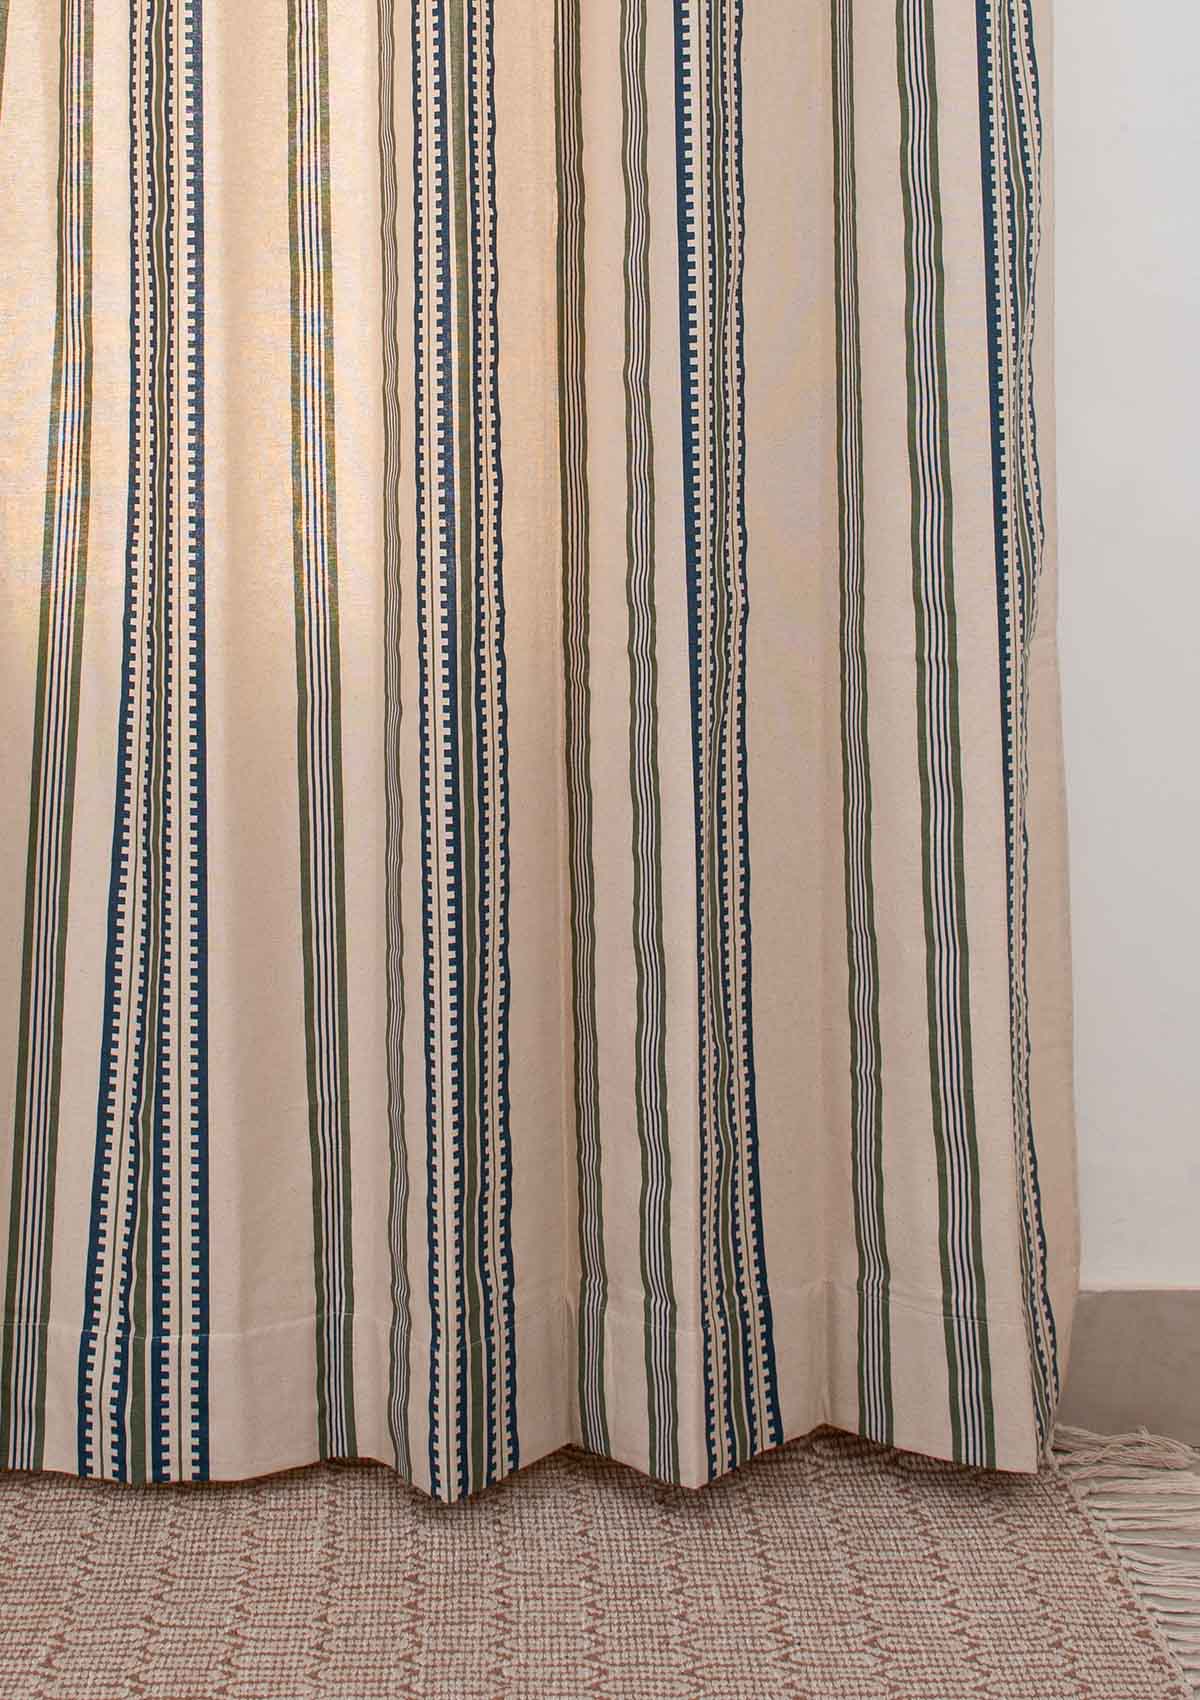 Roman Stripes Printed Cotton Curtain -  Pepper Green and Night Blue - Single